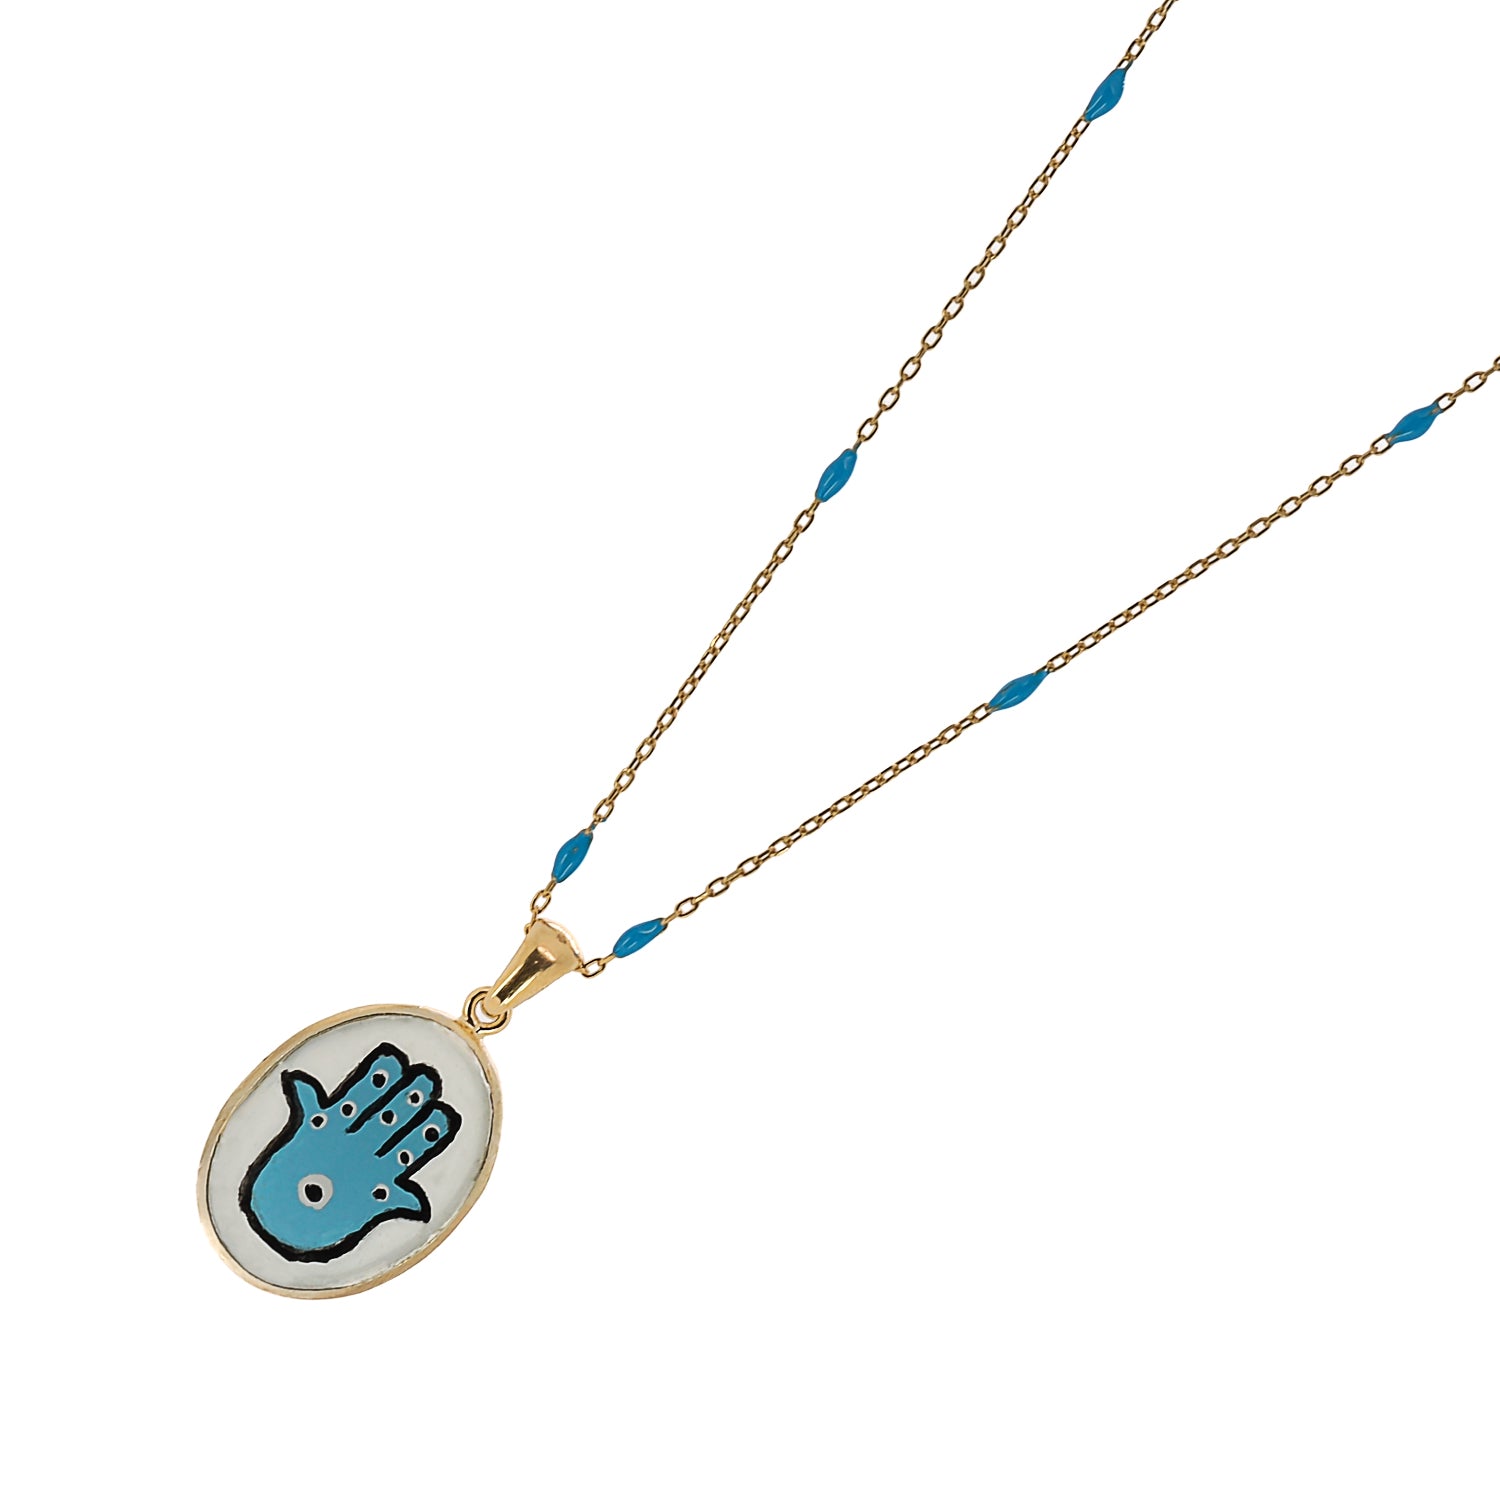 Elegant Silver Hamsa Hand Pendant Necklace with 18K Gold Plated Chain.